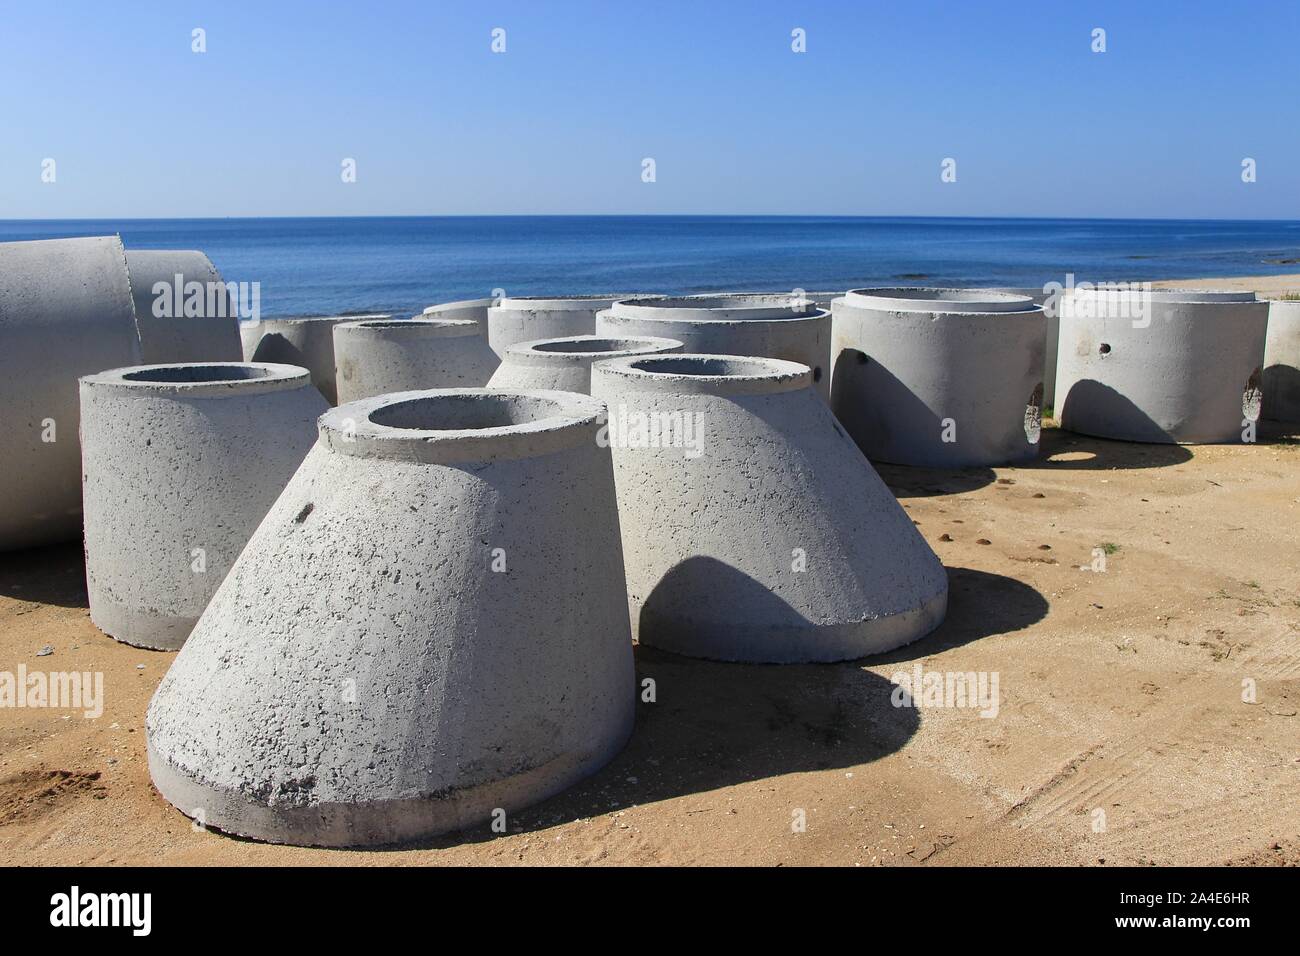 Large new concrete circular pipes lying down on a sandy beach for the construction of sewerage system background view of clear blue sea and sky Stock Photo